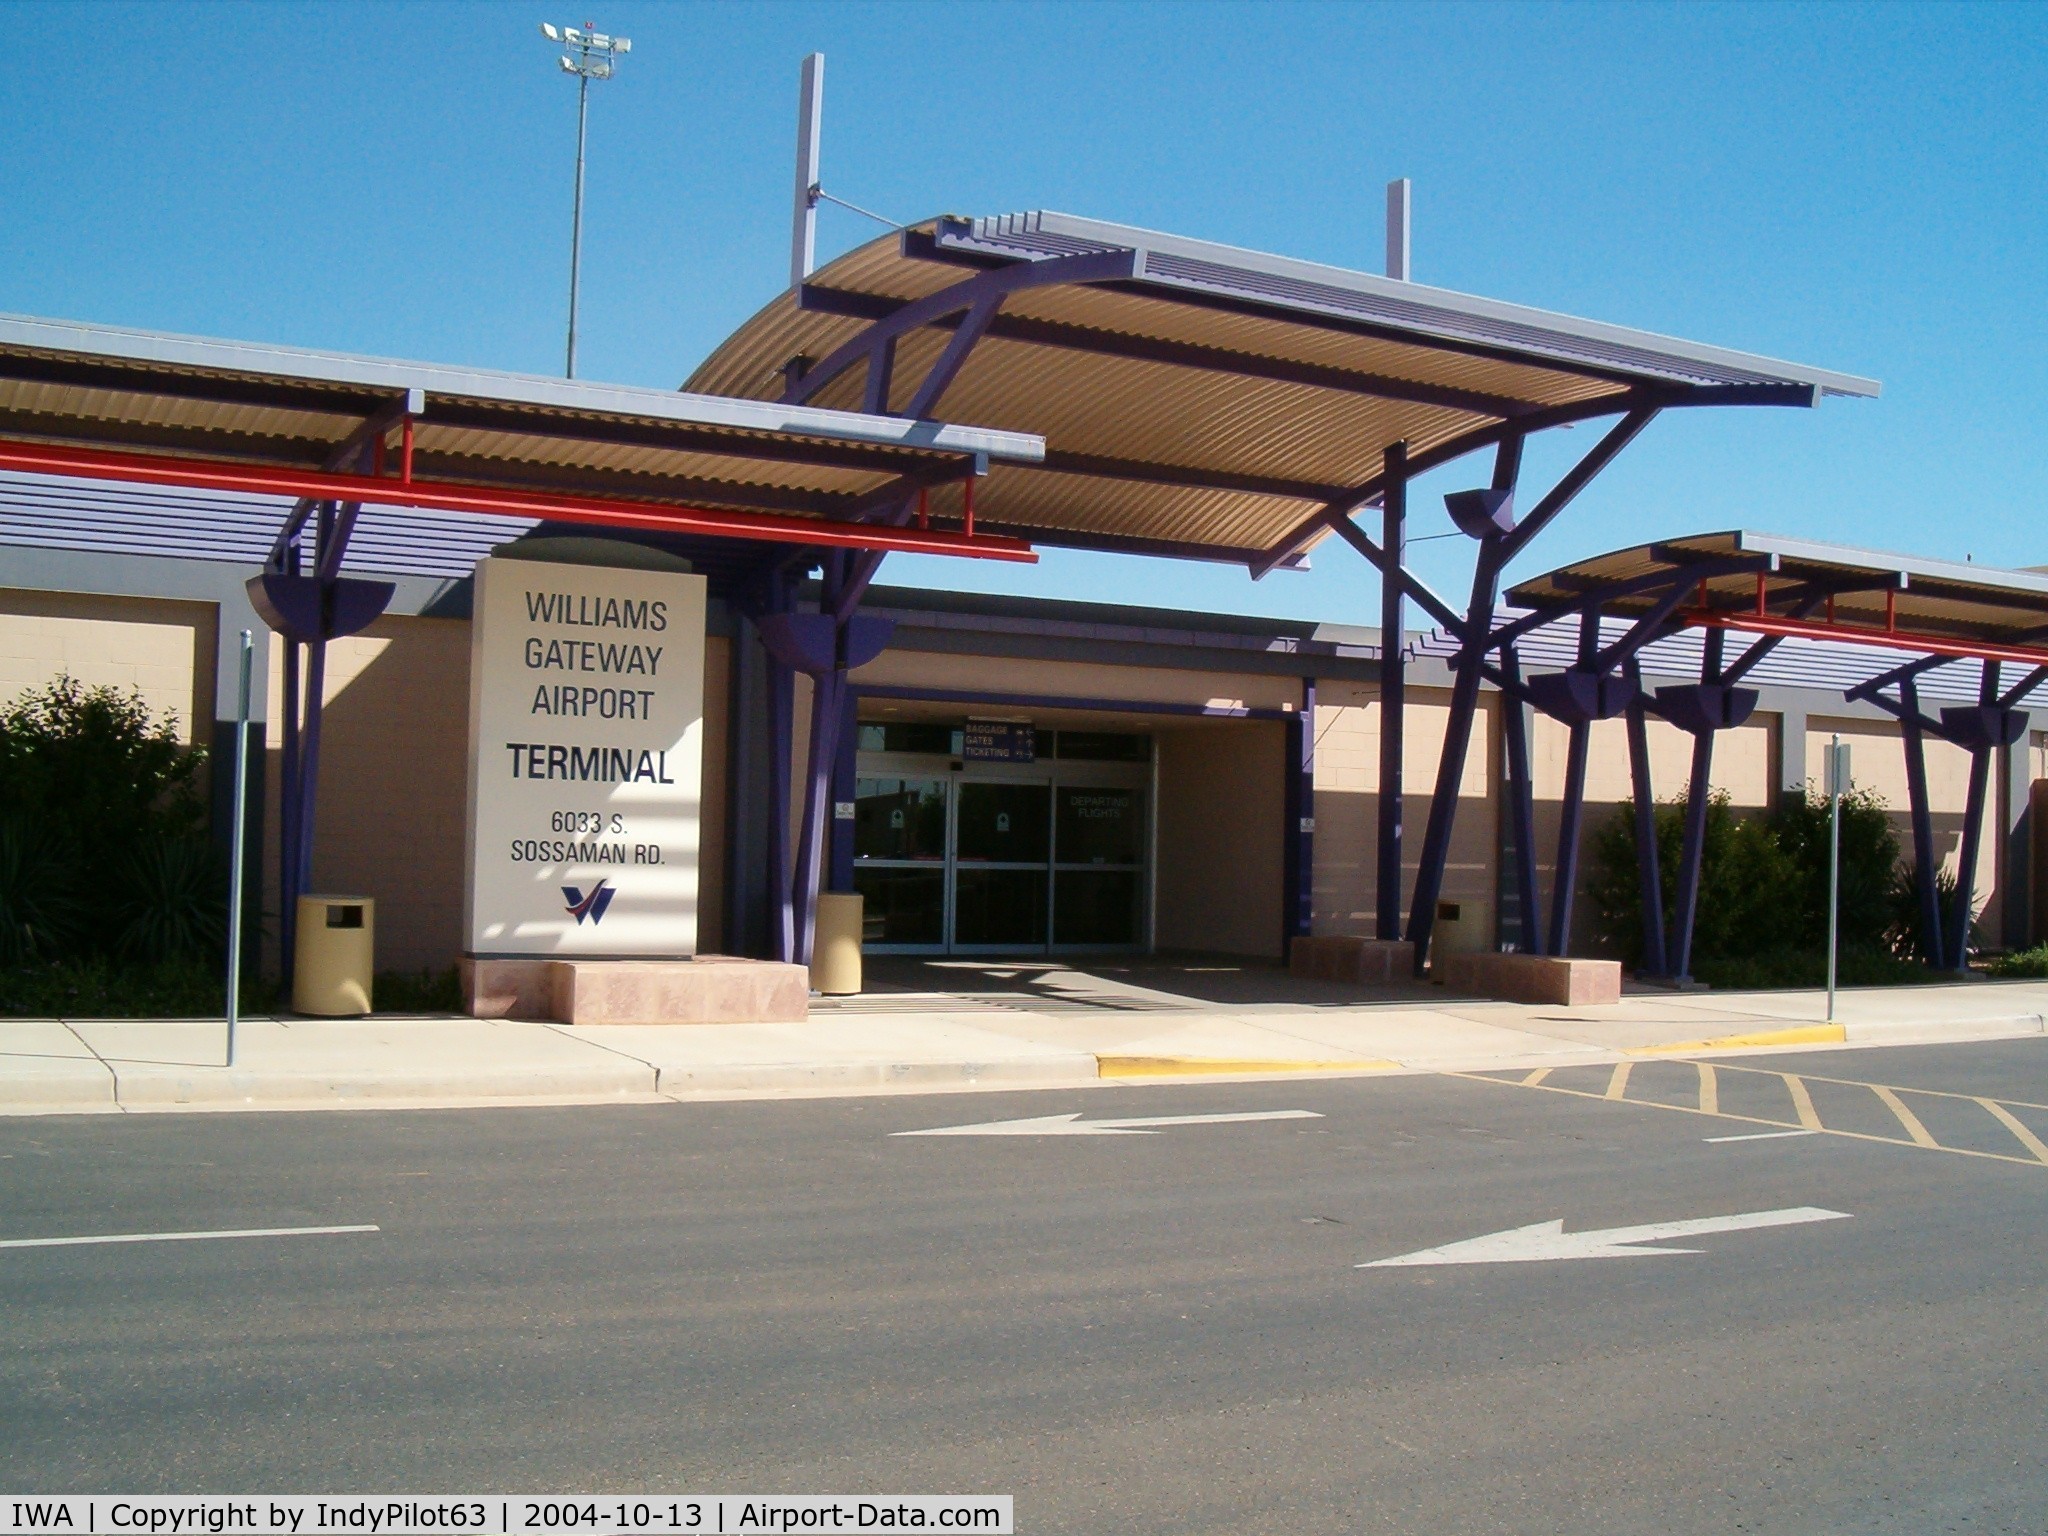 Phoenix-mesa Gateway Airport (IWA) - The nice new terminal building. At this shooting in 2004, it was empty.